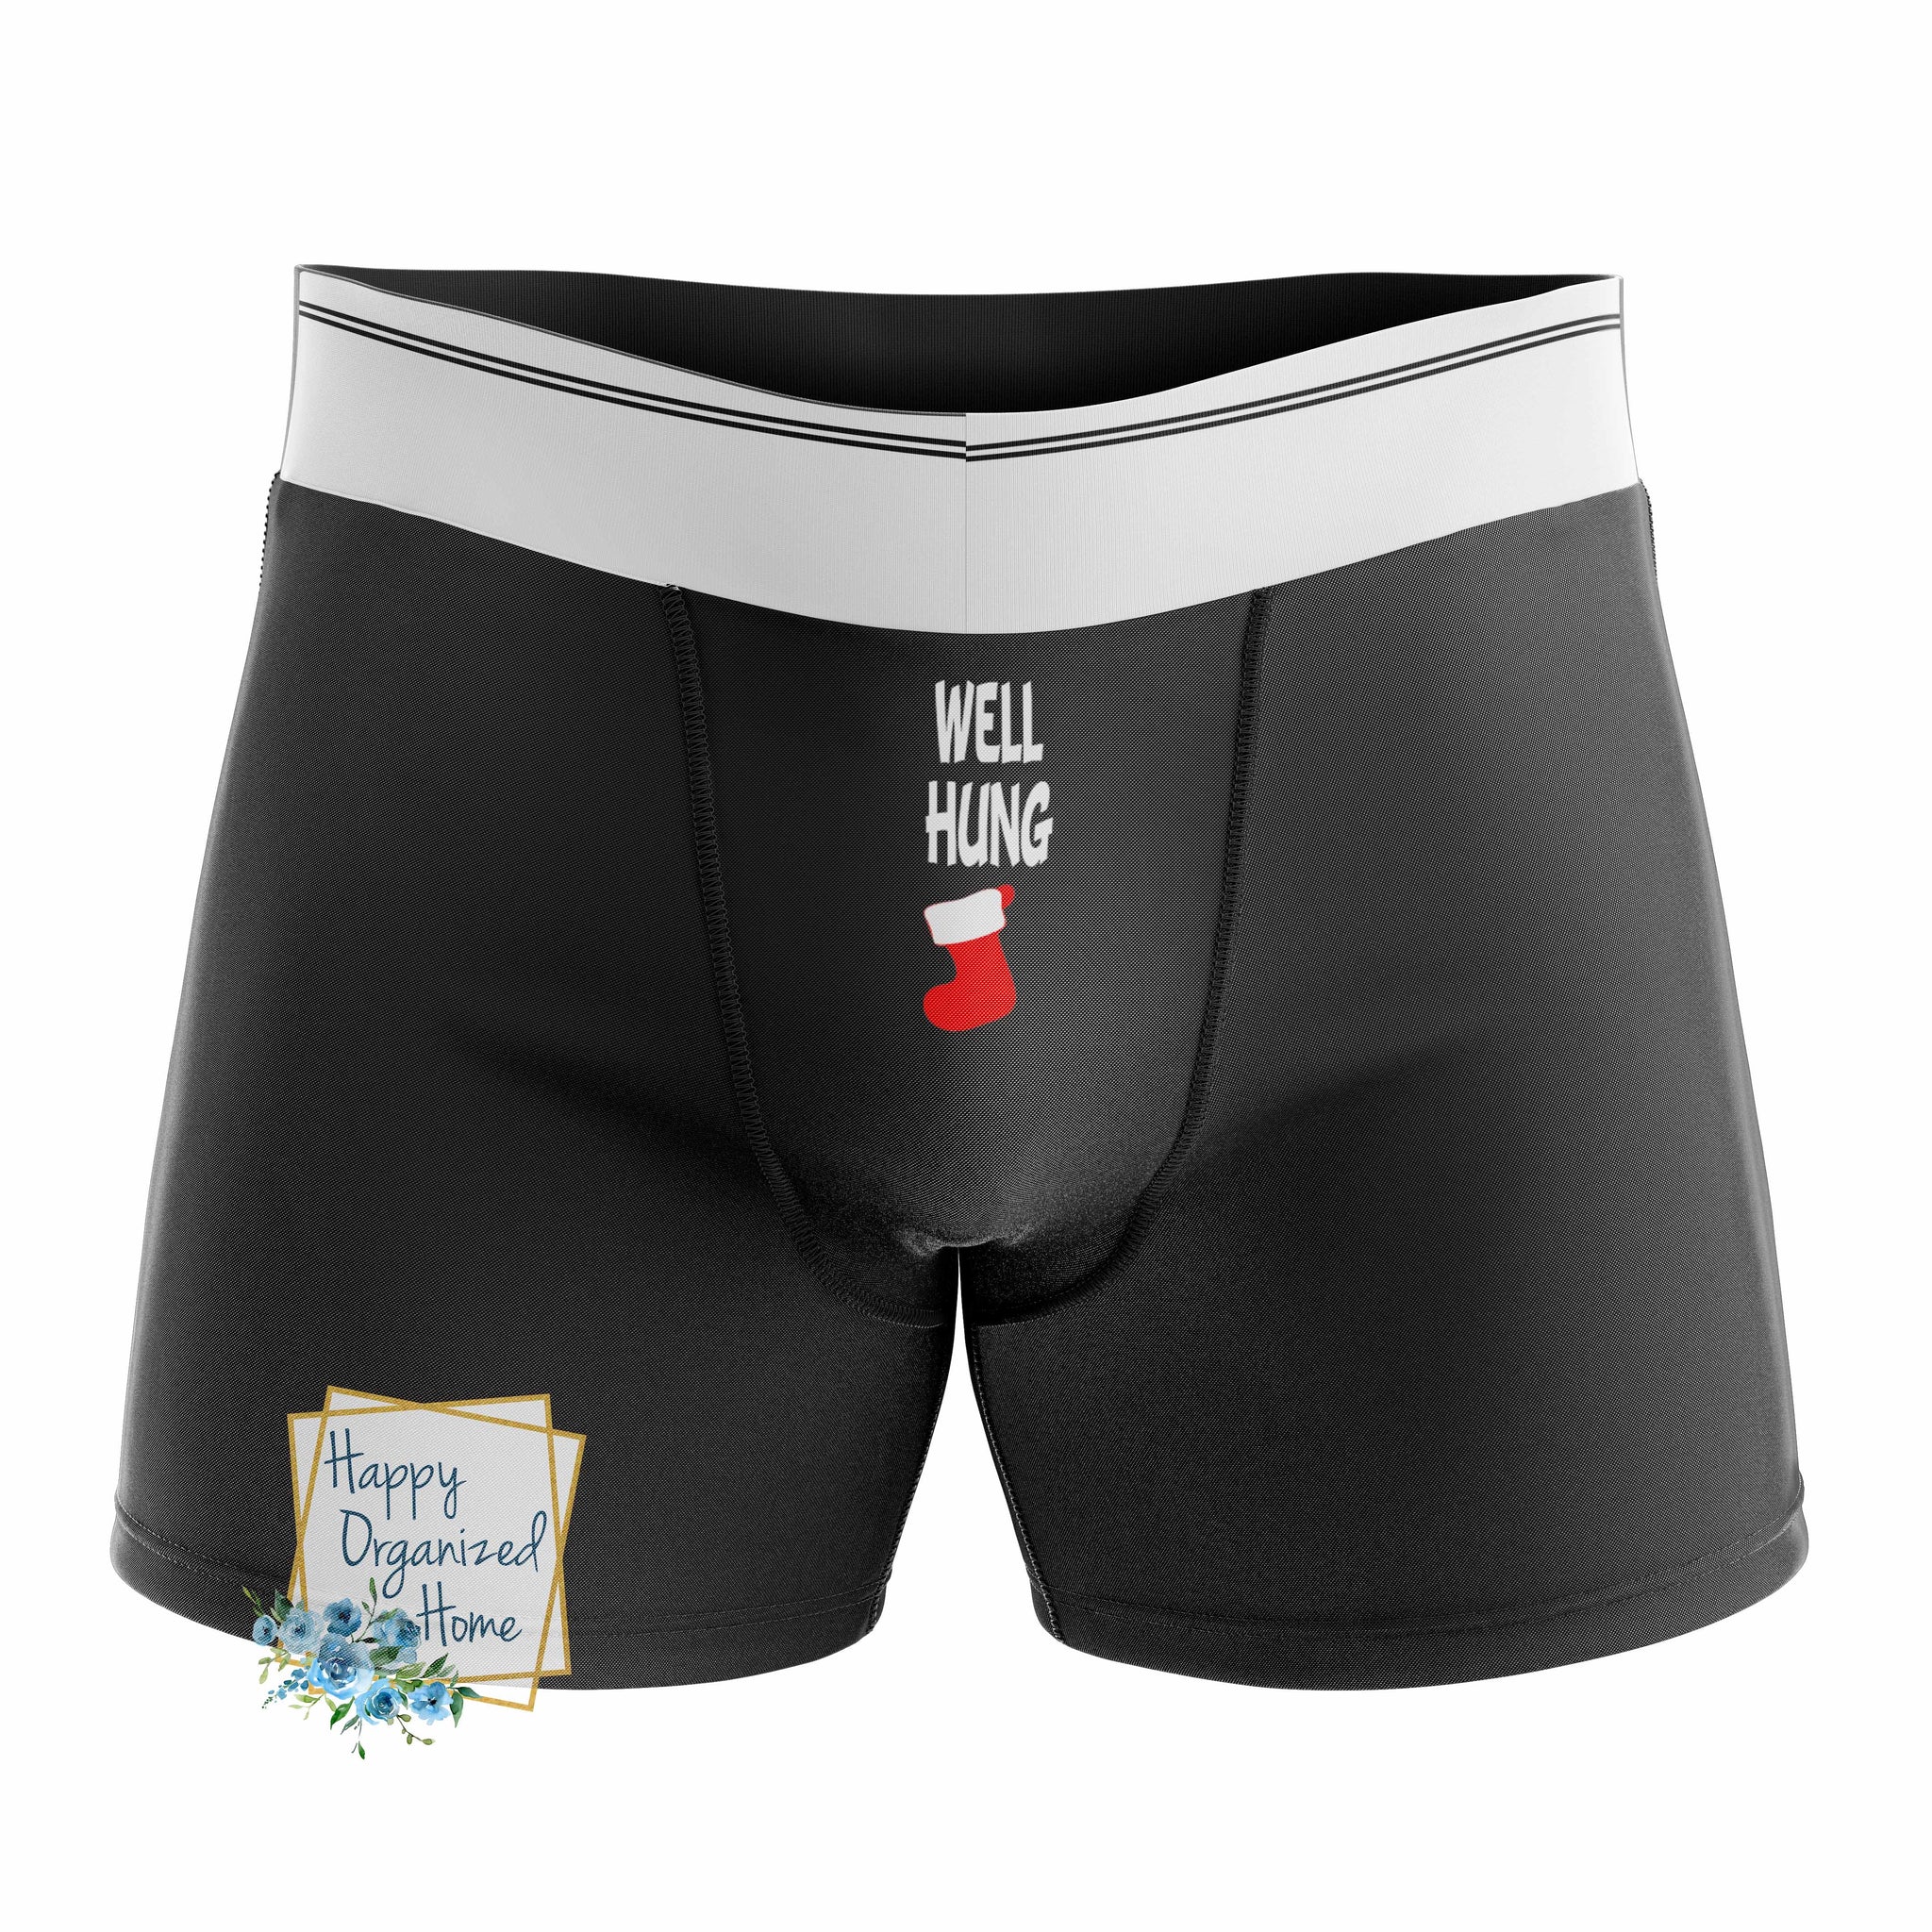 Well Hung, stocking -  Men's Naughty Boxer Briefs